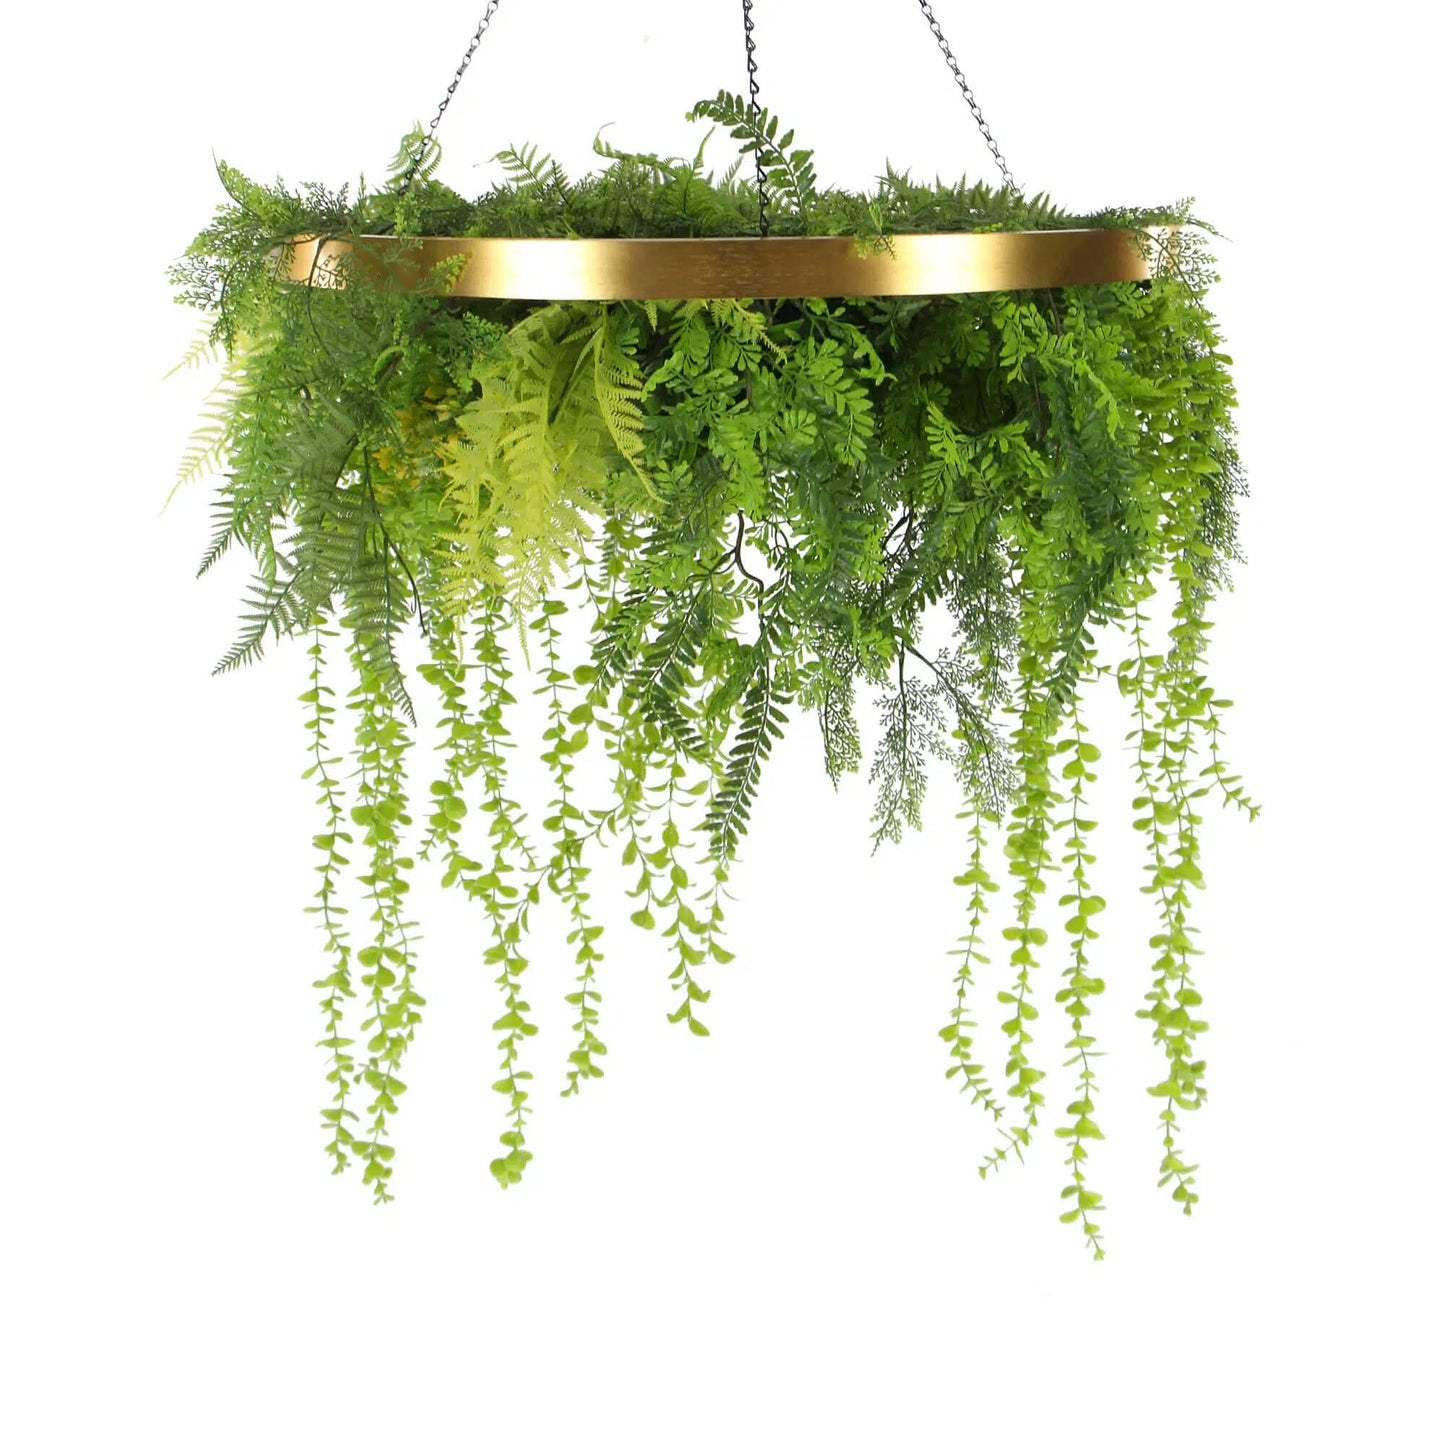 Imitation Gold Artificial Hanging Green Wall Disc 80cm (Limited Edition) UV Resistant Foliage